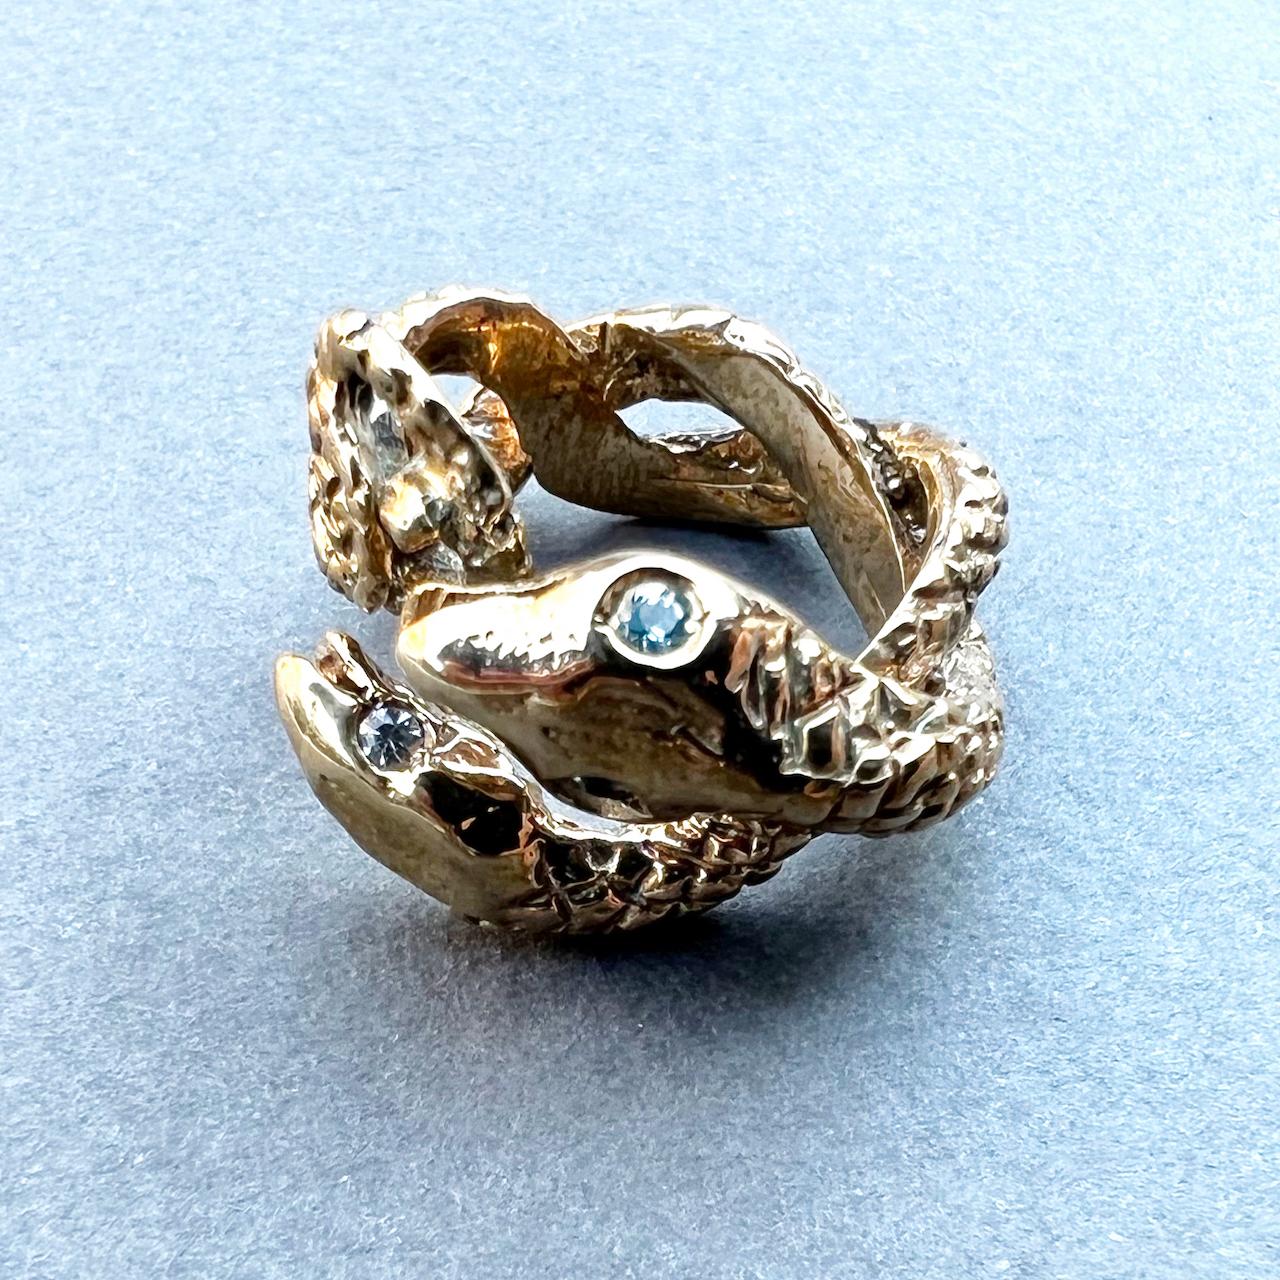 Animal jewelry Aquamarine Snake Ring Bronze Cocktail Ring J Dauphin For Sale 7